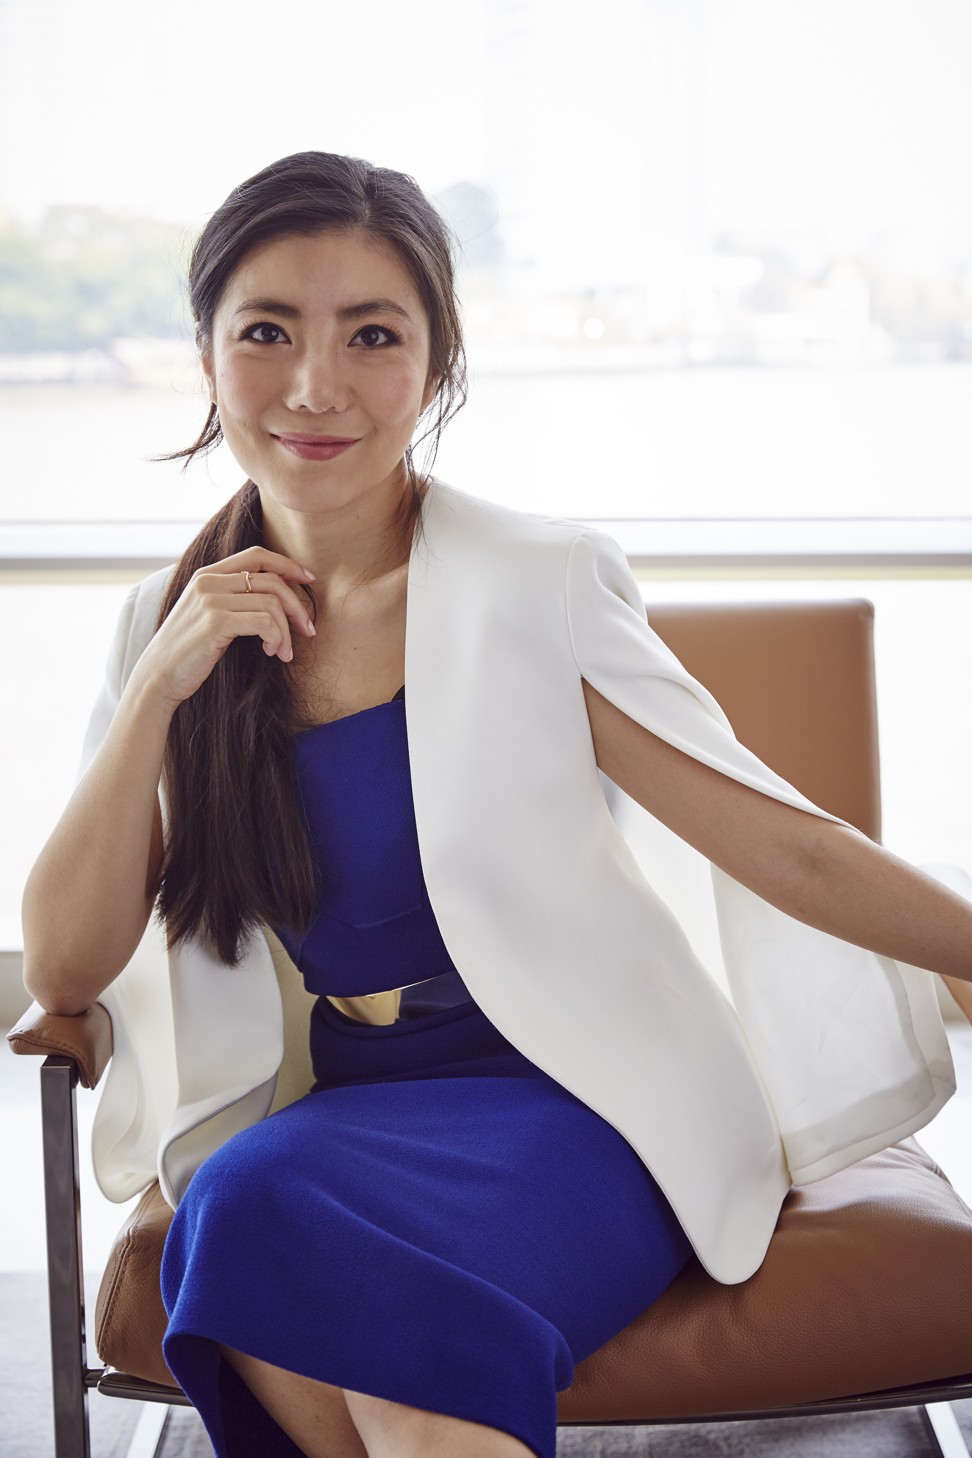 Jaelle Ang, co-founder of The Great Room co-working space company, which has opened a branch in Quarry Bay, Hong Kong.